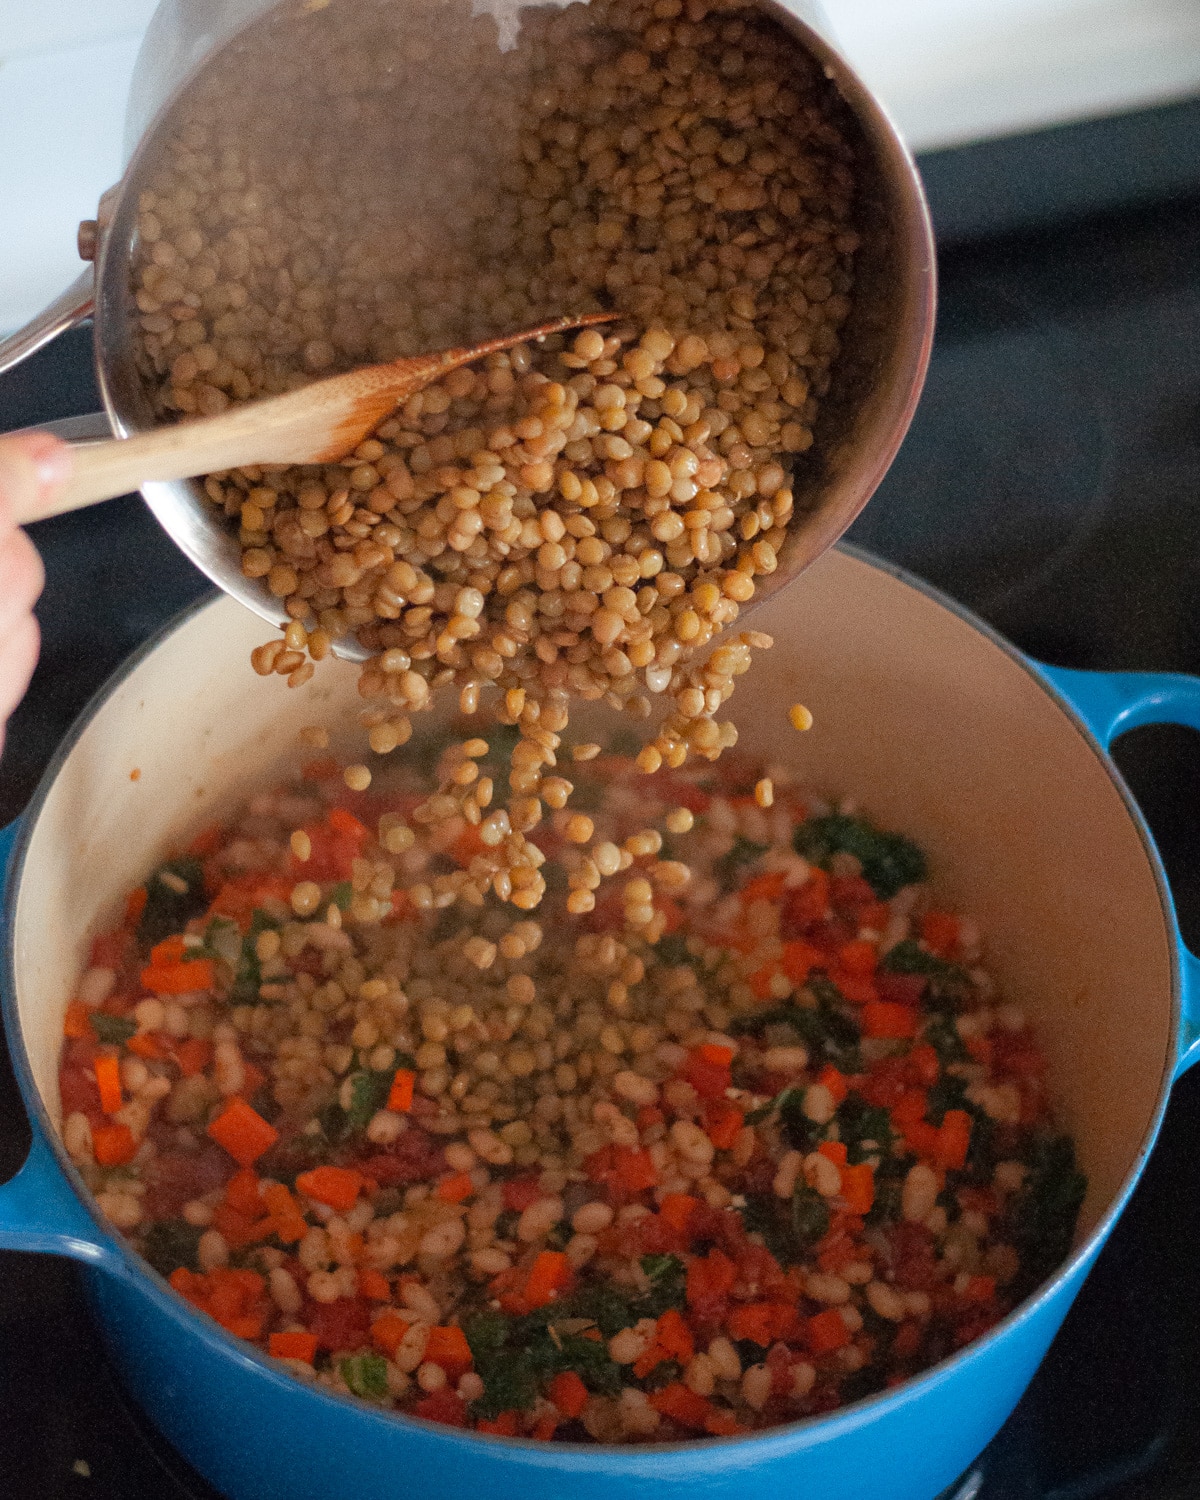 process shot showing tuscan white bean soup being made on the stove. showing cooked lentils being poured into the pot.